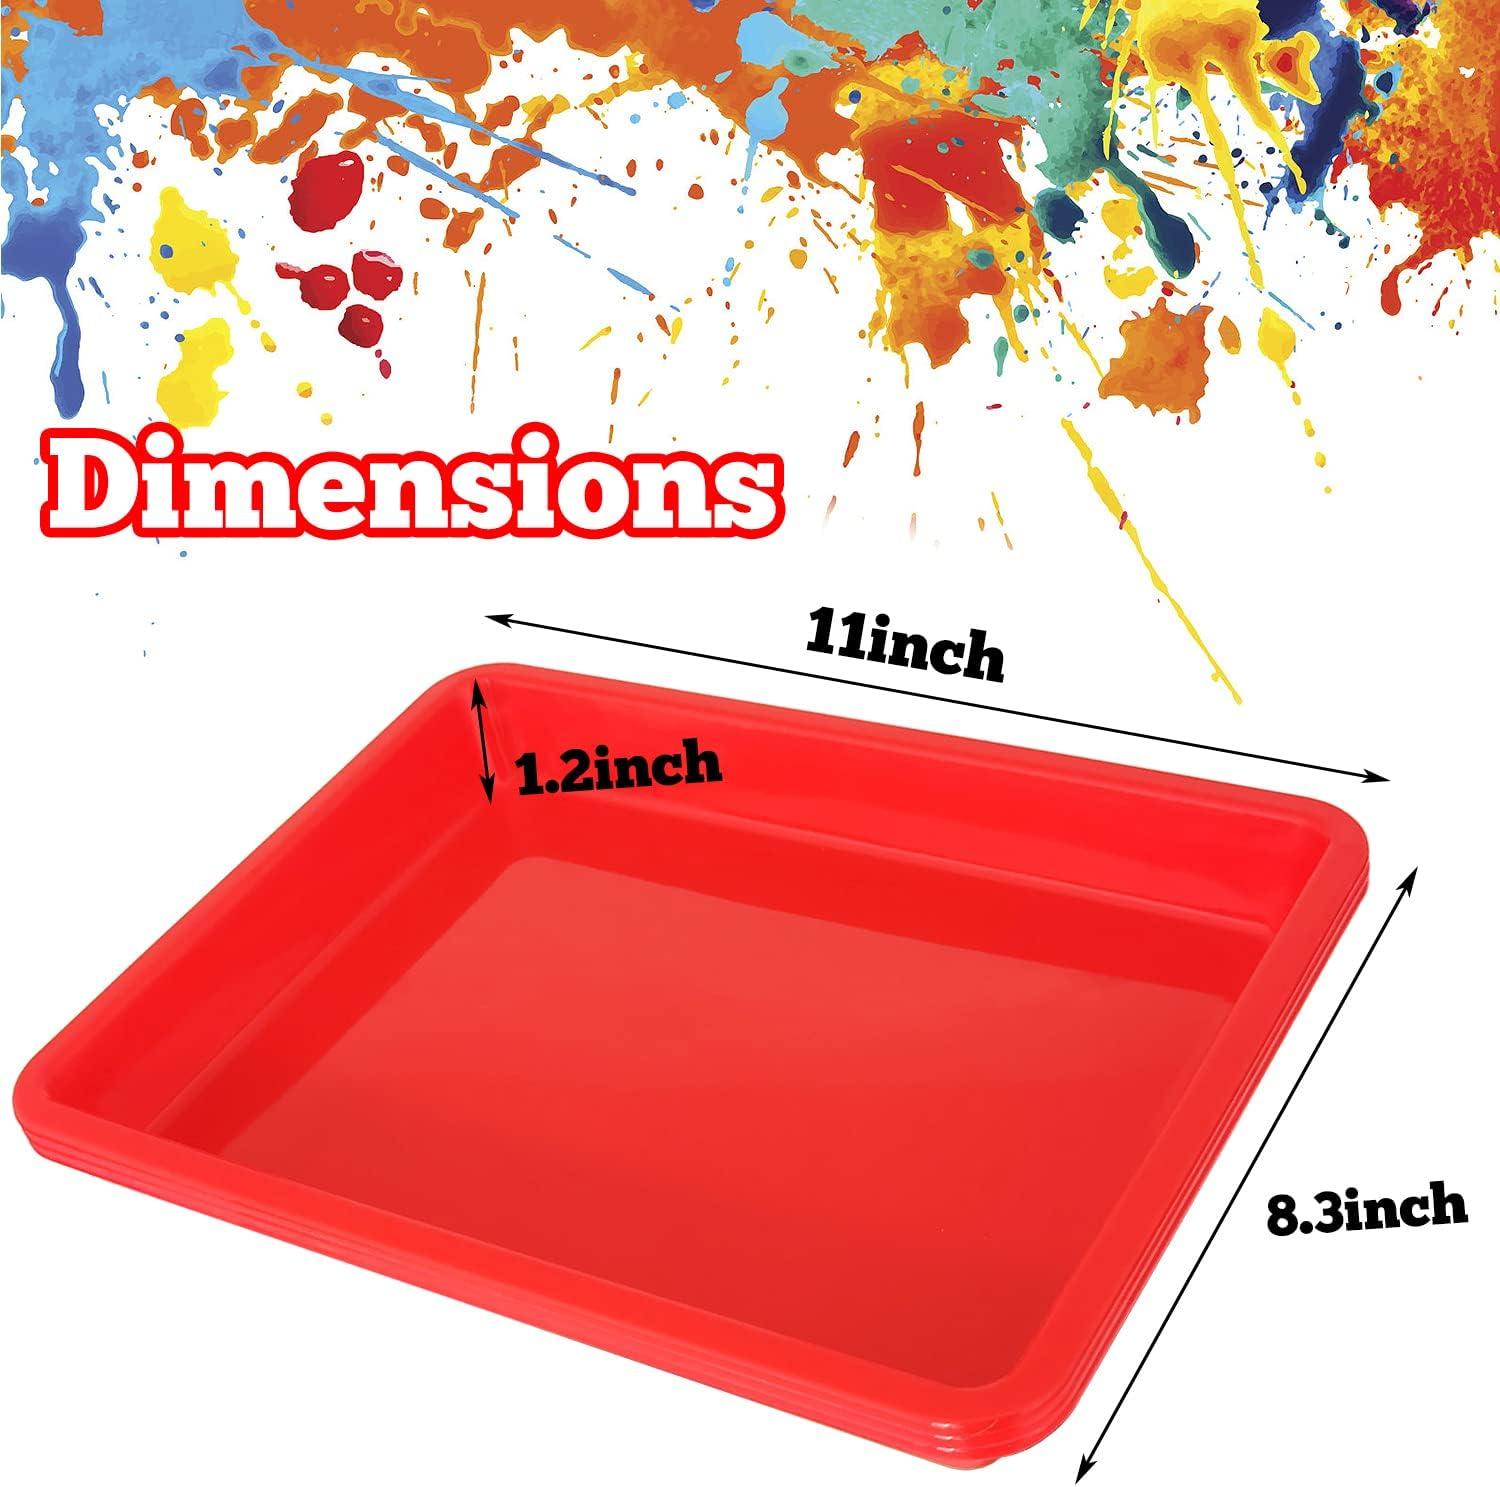 12 Pack Multicolor Plastic Art Trays Activity Tray Organizer for DIY Arts  Crafts